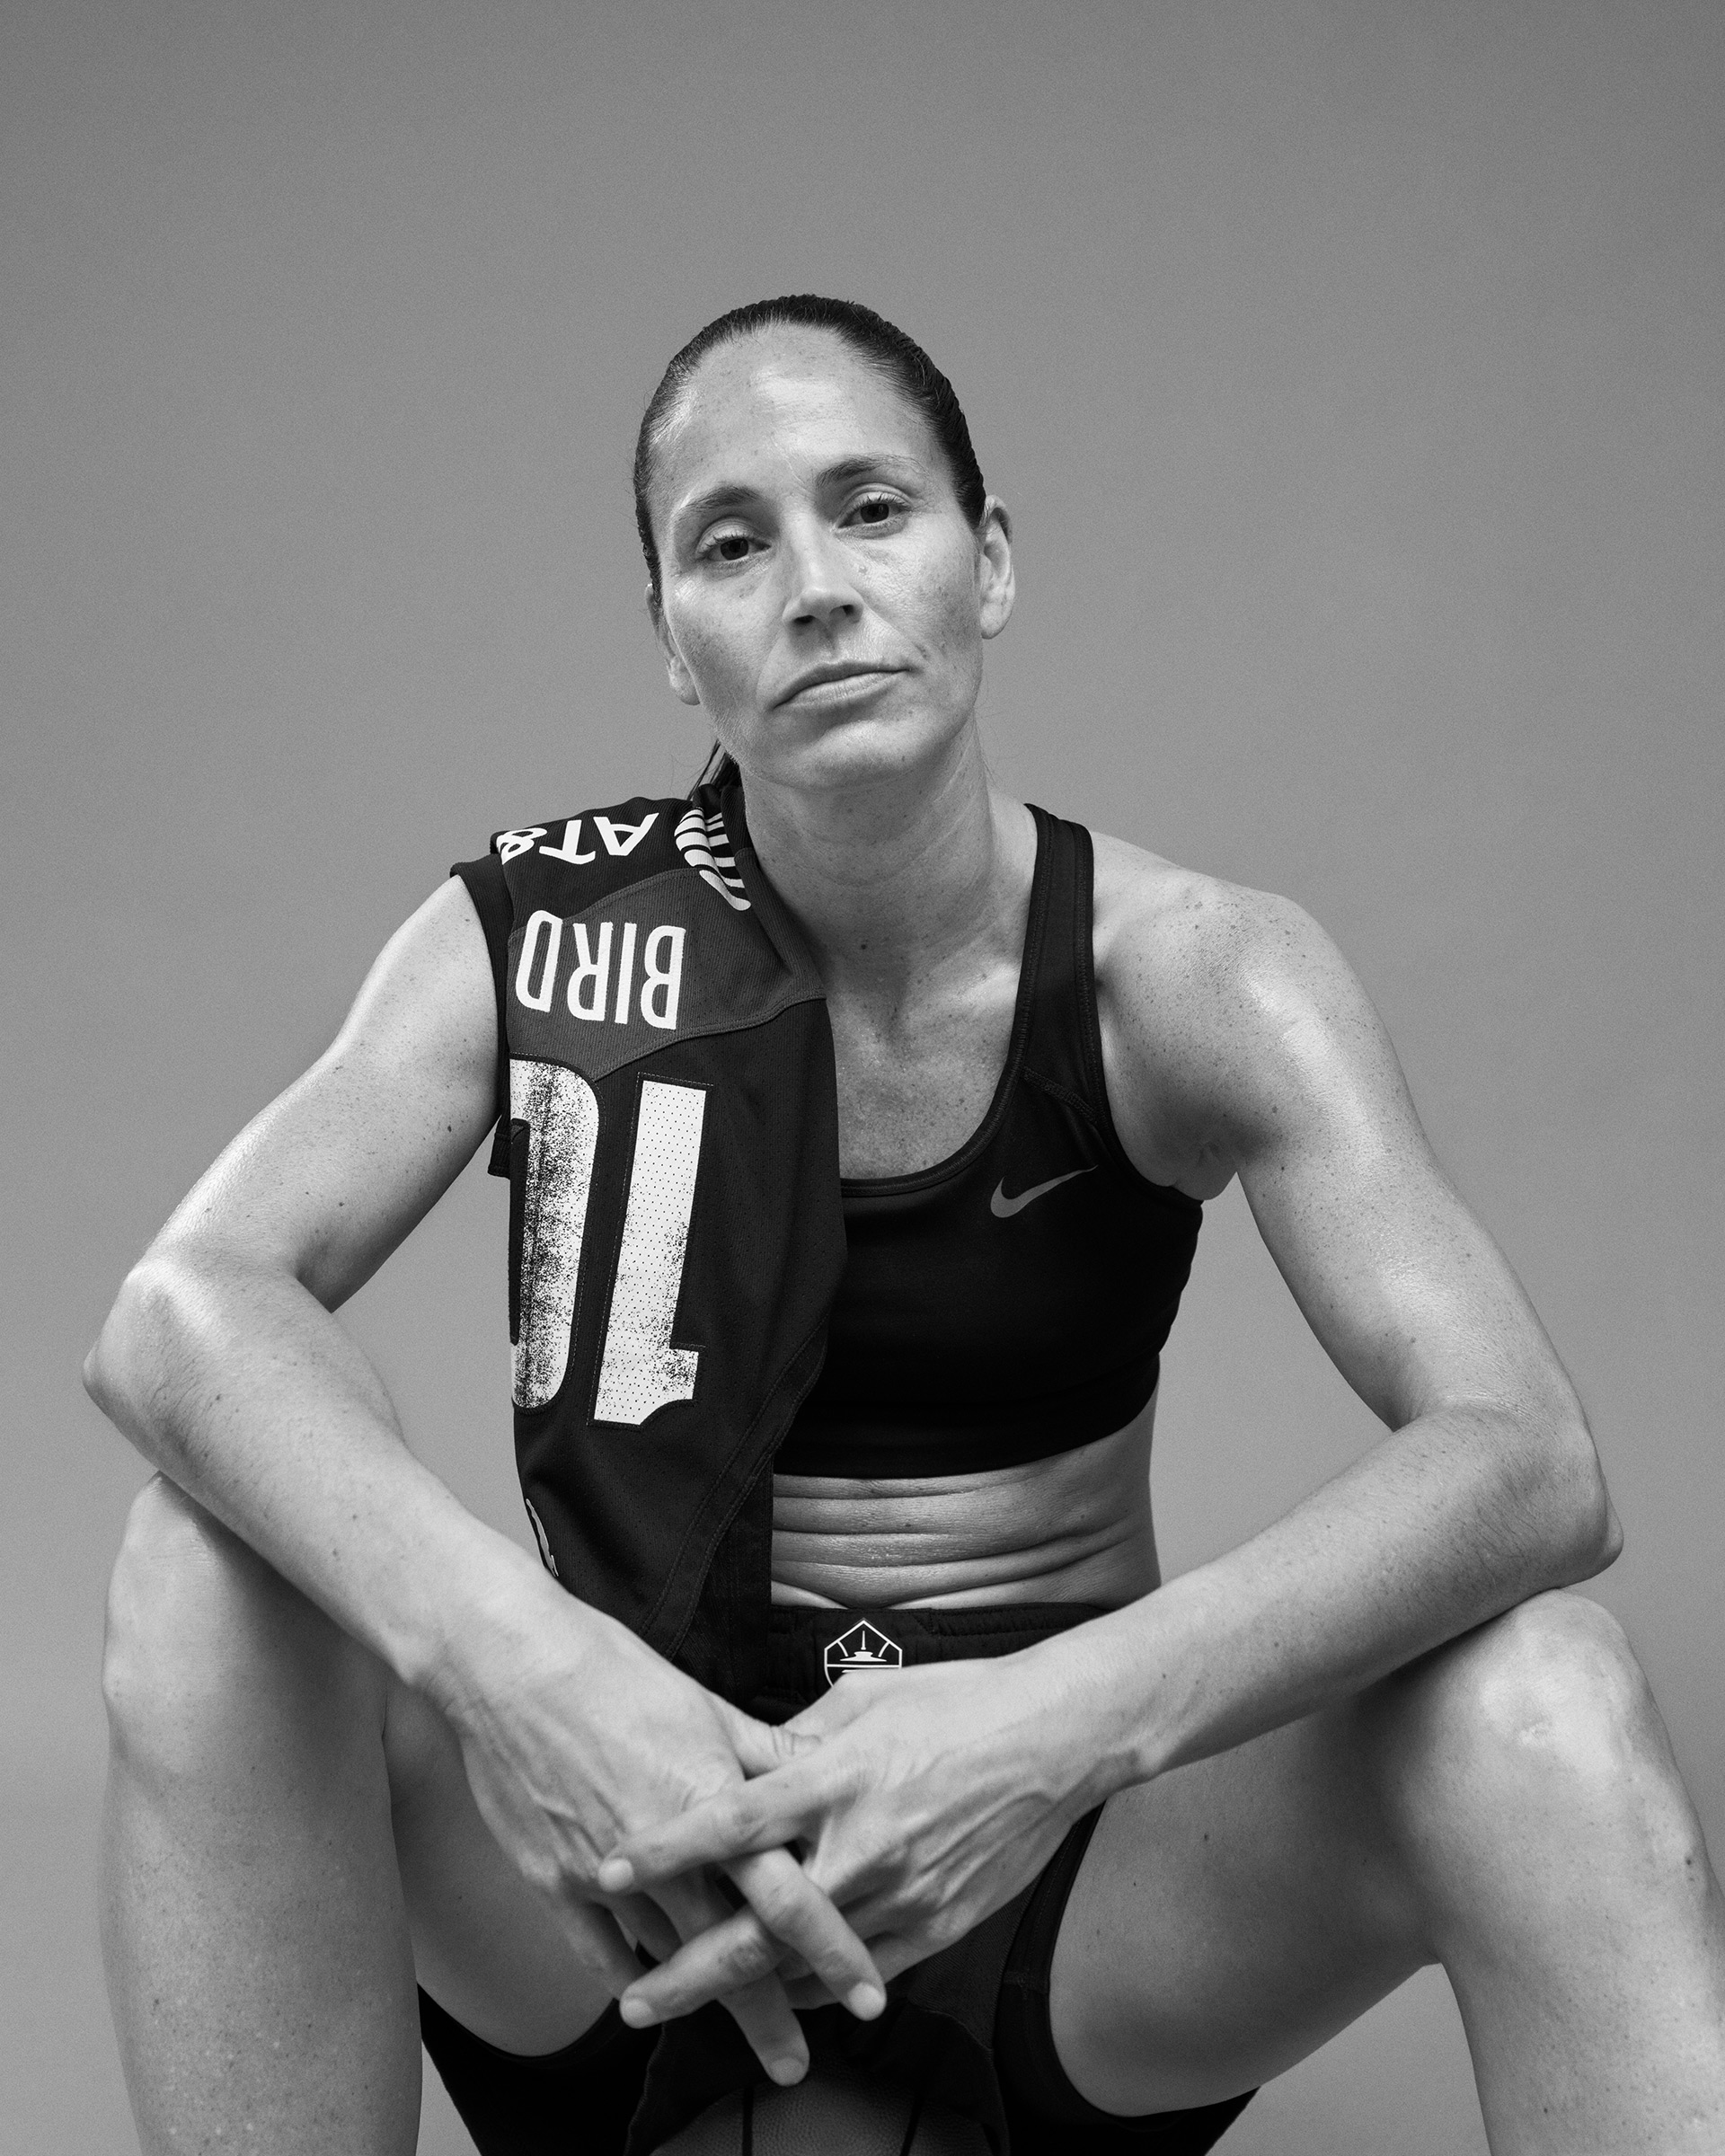 At 40, Bird—still one of the WNBA’s best passers and shooters—shows few signs of slowing (Paola Kudacki for TIME)